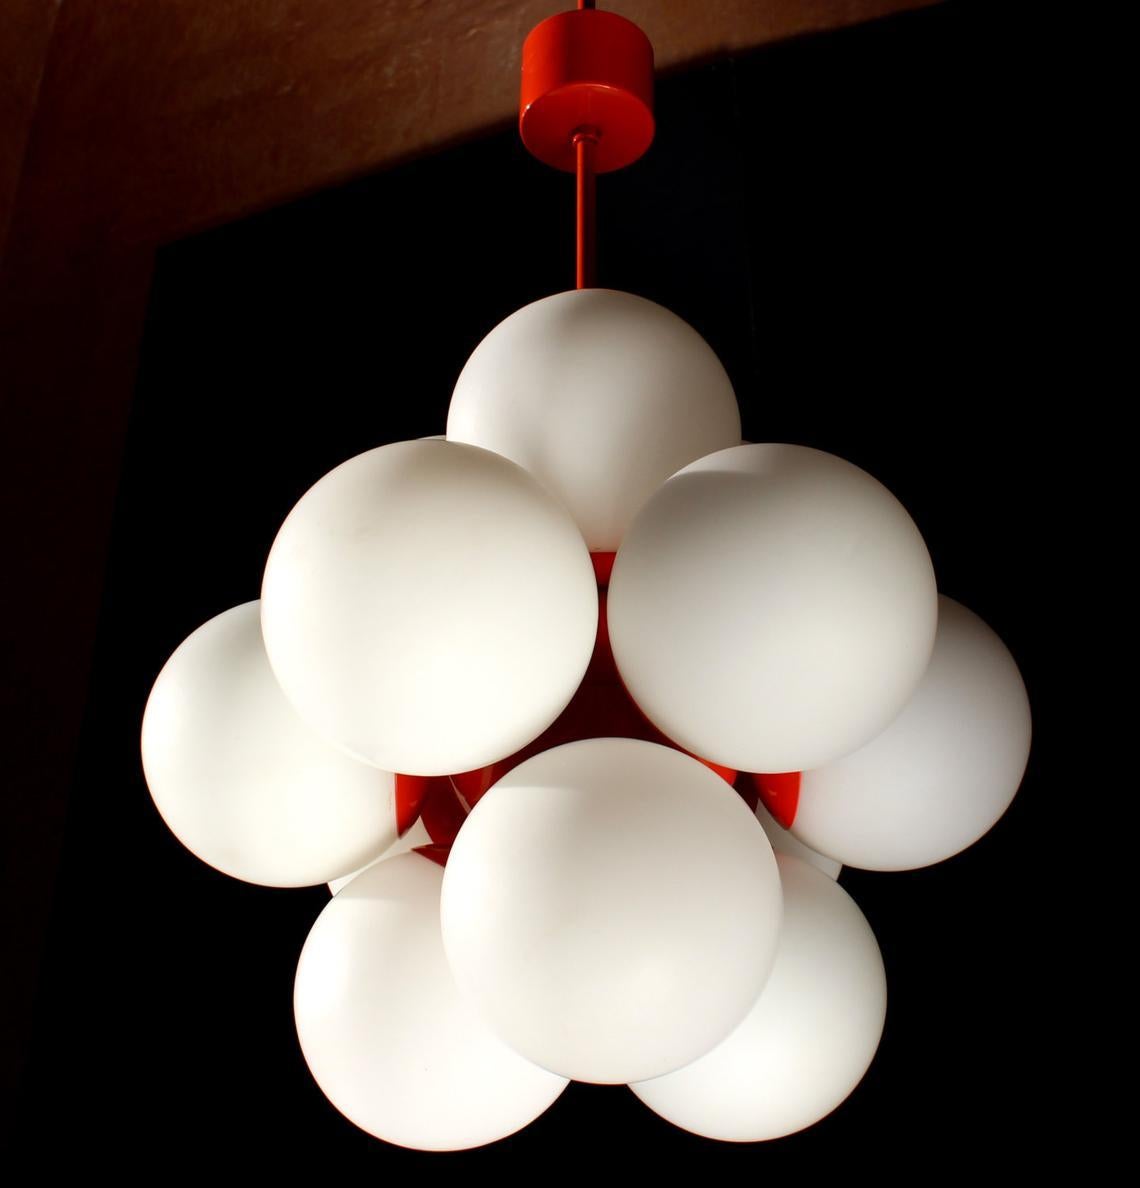 Chandelier with 12 lights ( E14) in red/orange enameled surface with opal glass. Diameter 19,5